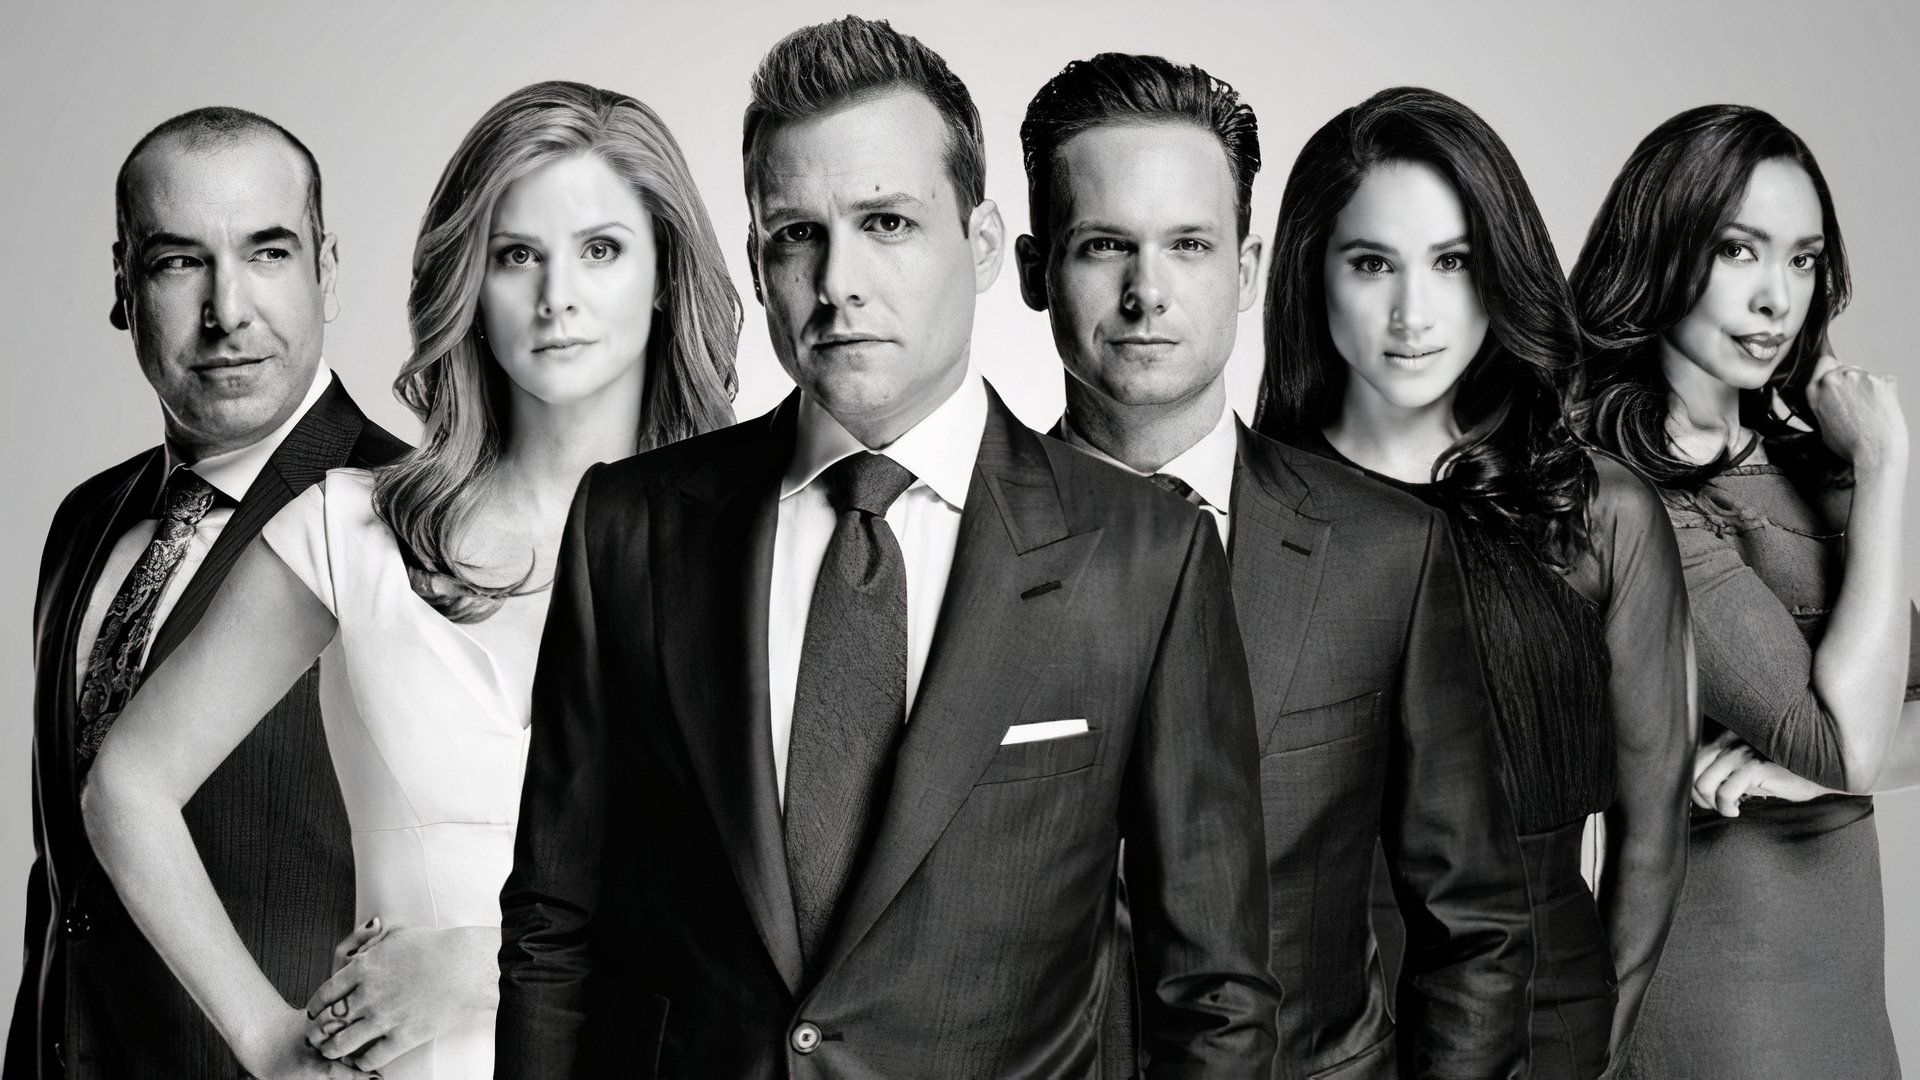 The Cast of Suits stands together